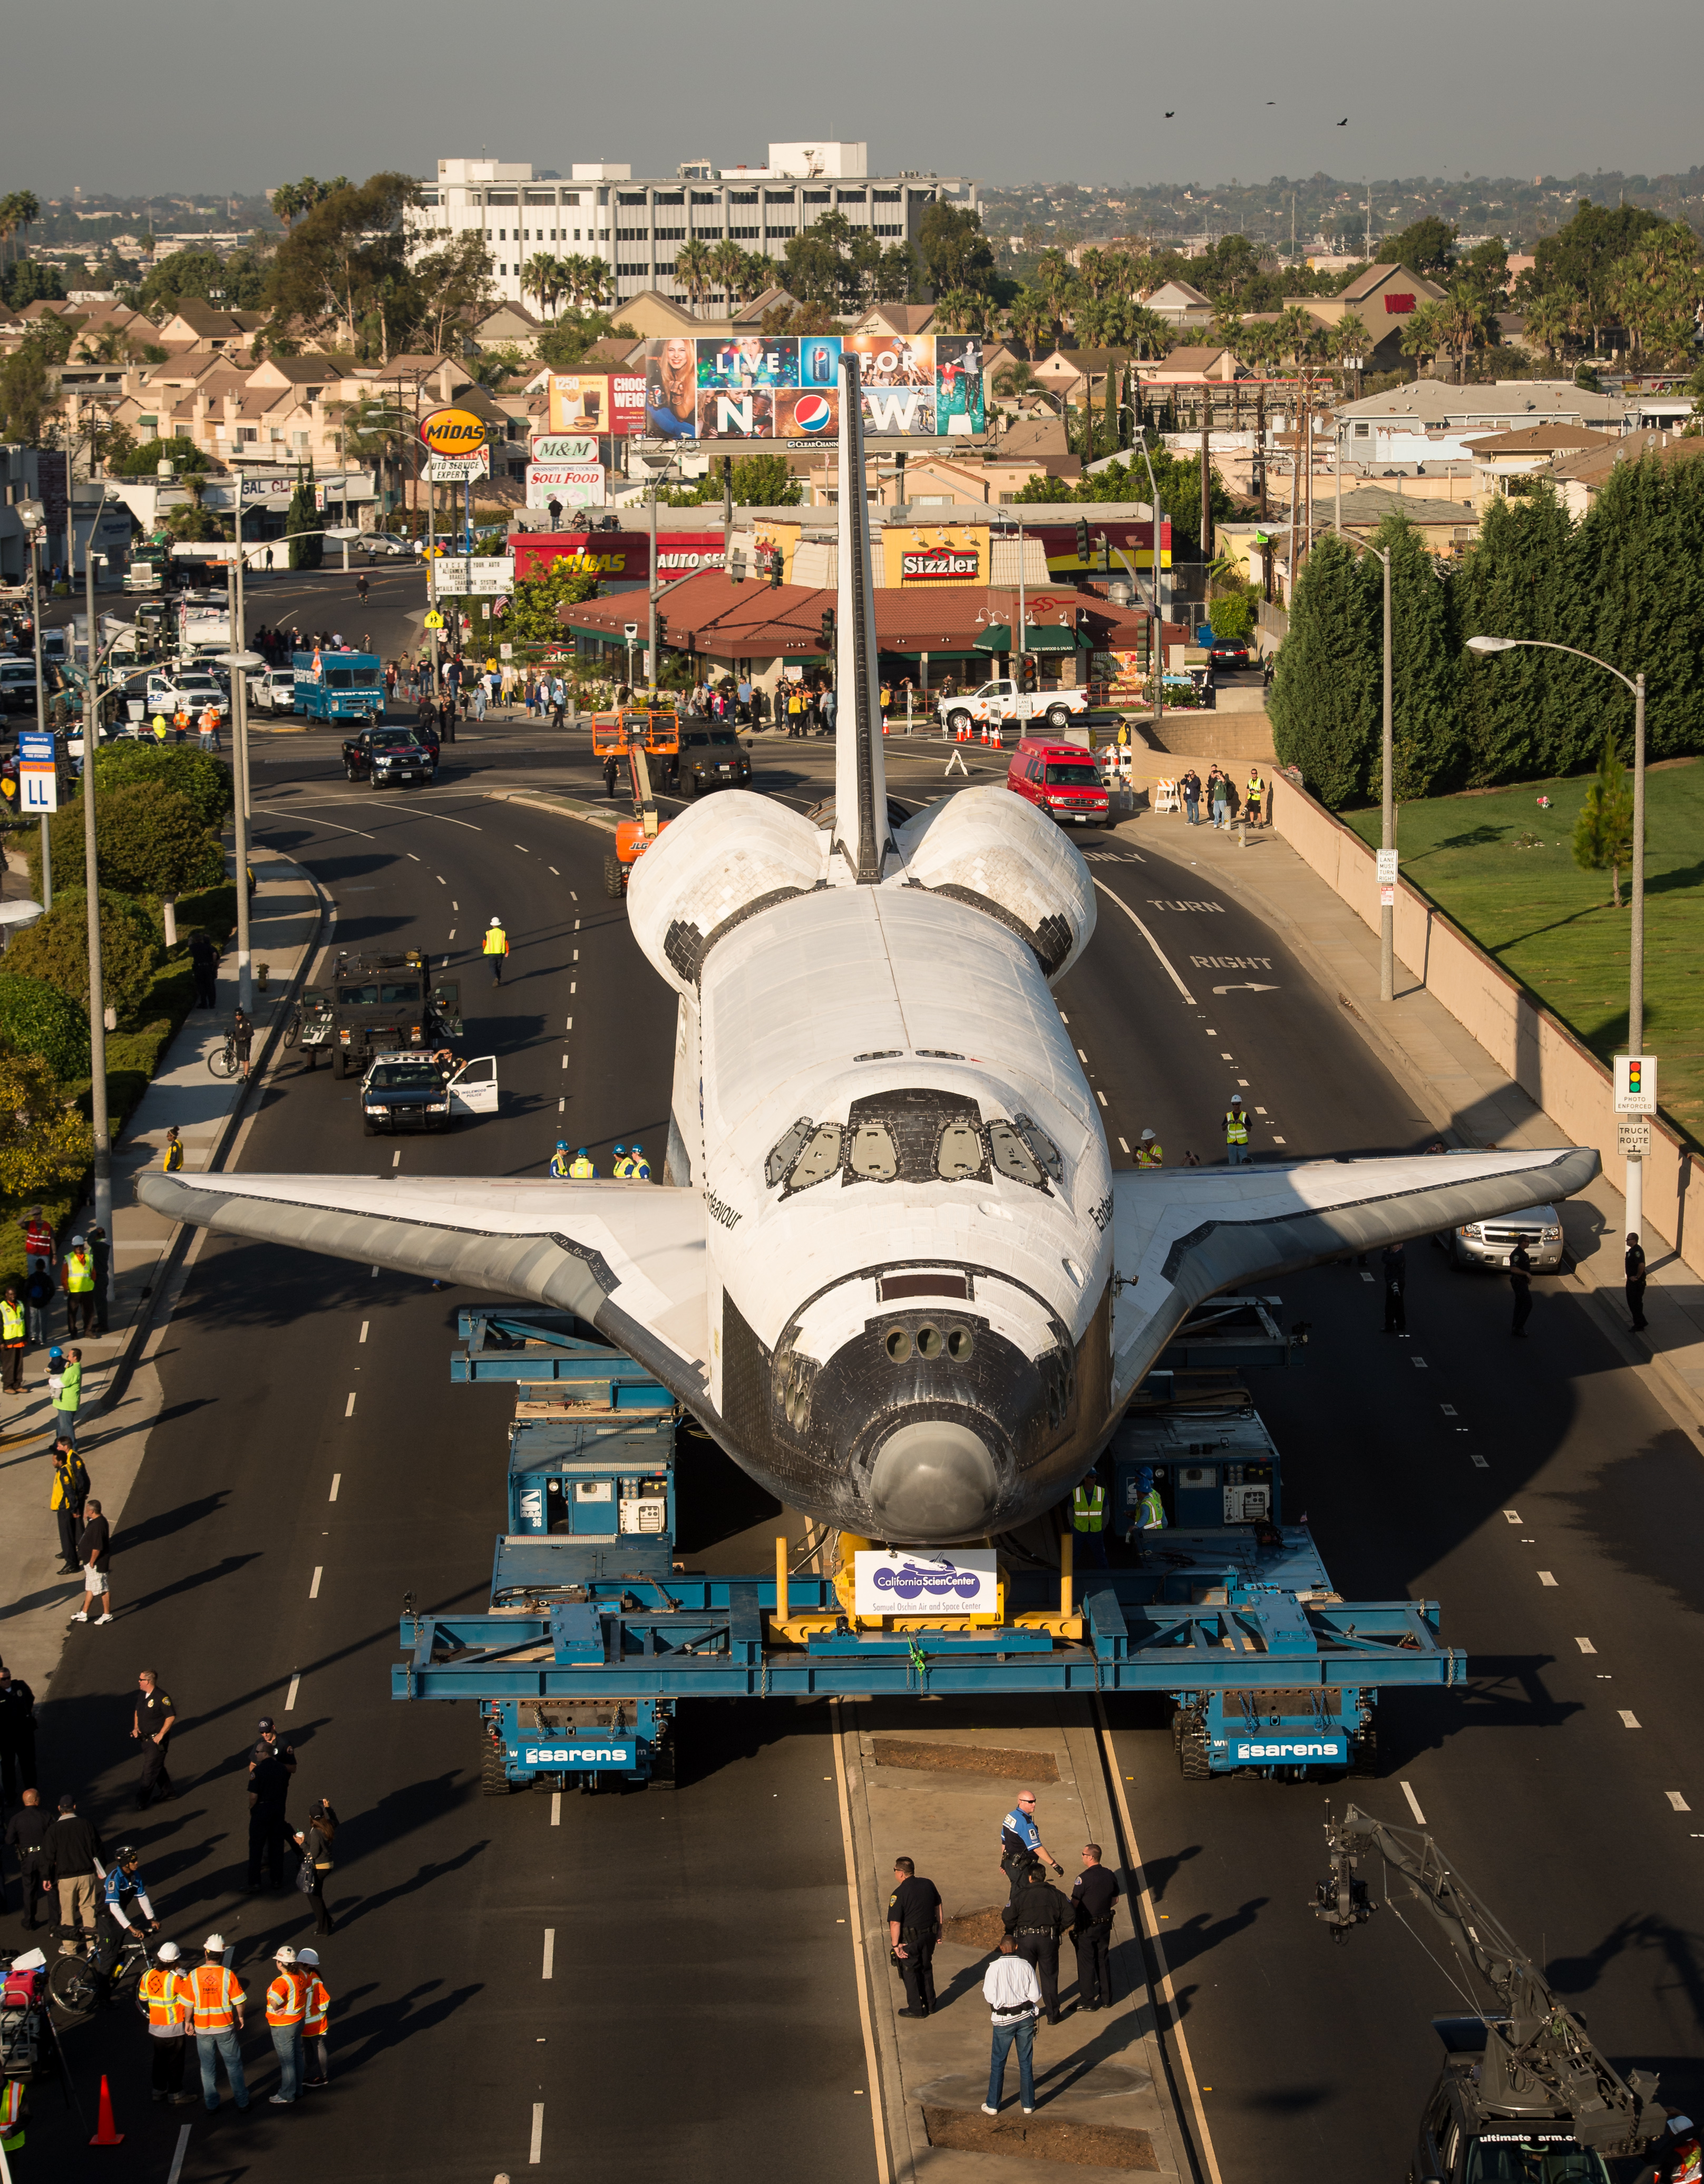 Space shuttle Endeavour parked on a city street